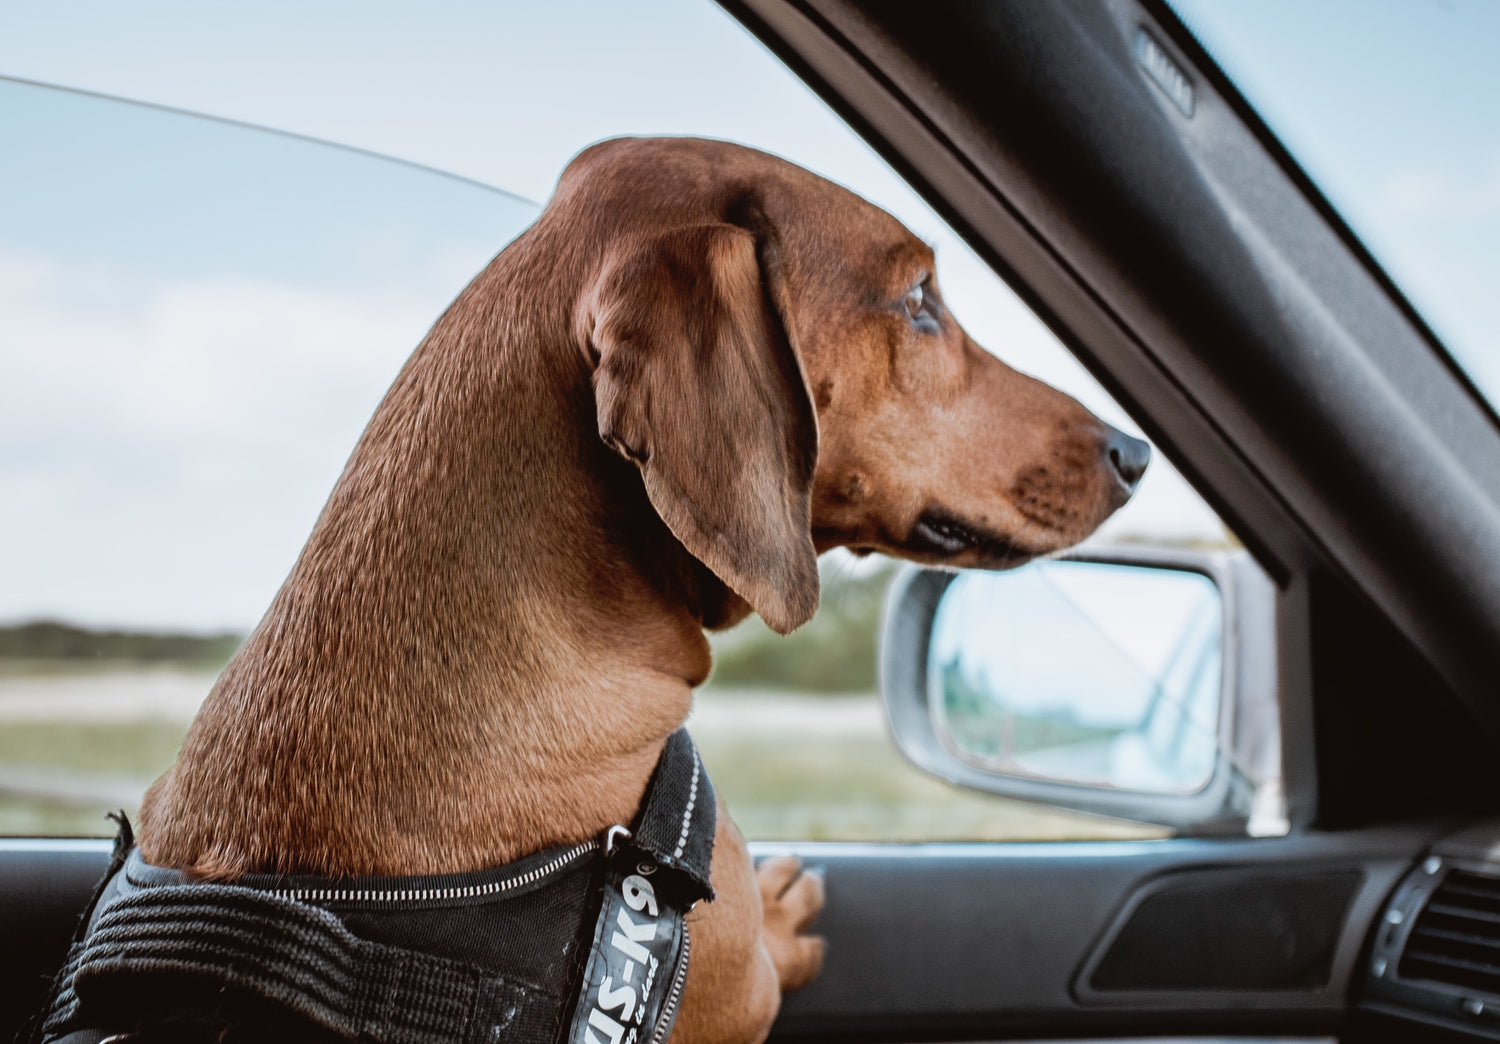 How to get your puppy used to car trips